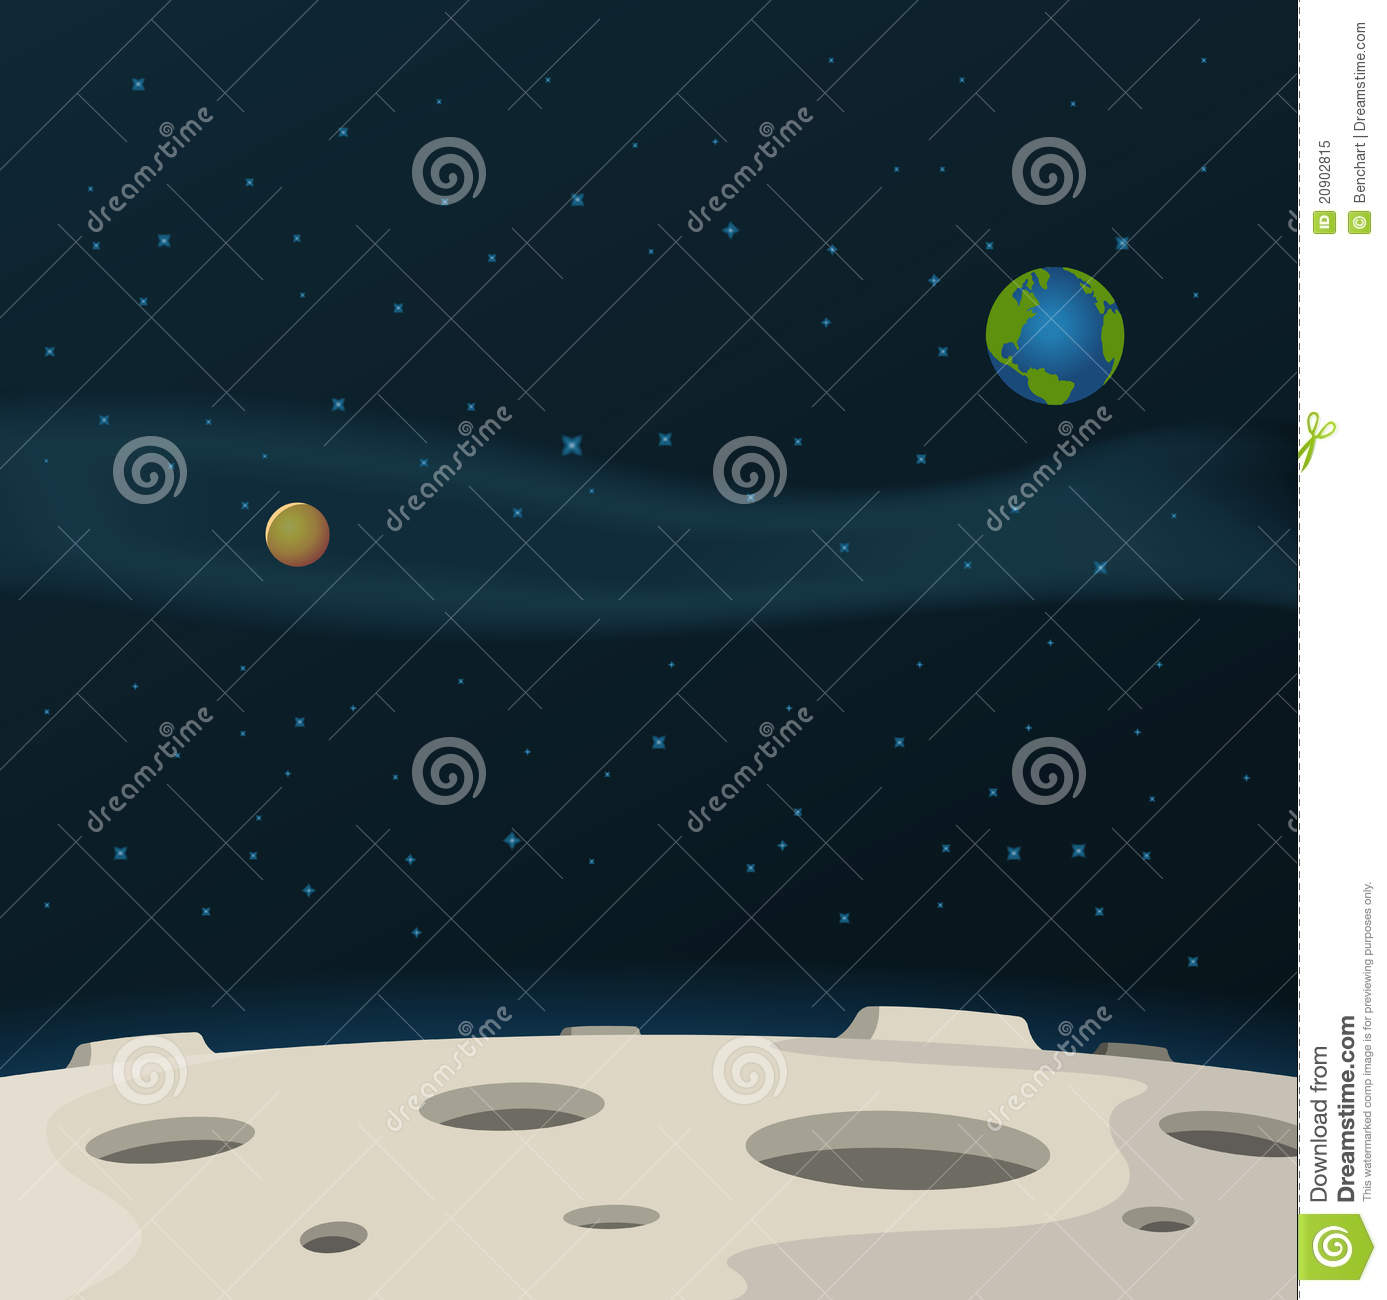 Similiar Graphic Of The Surface Of The Moon Keywords.